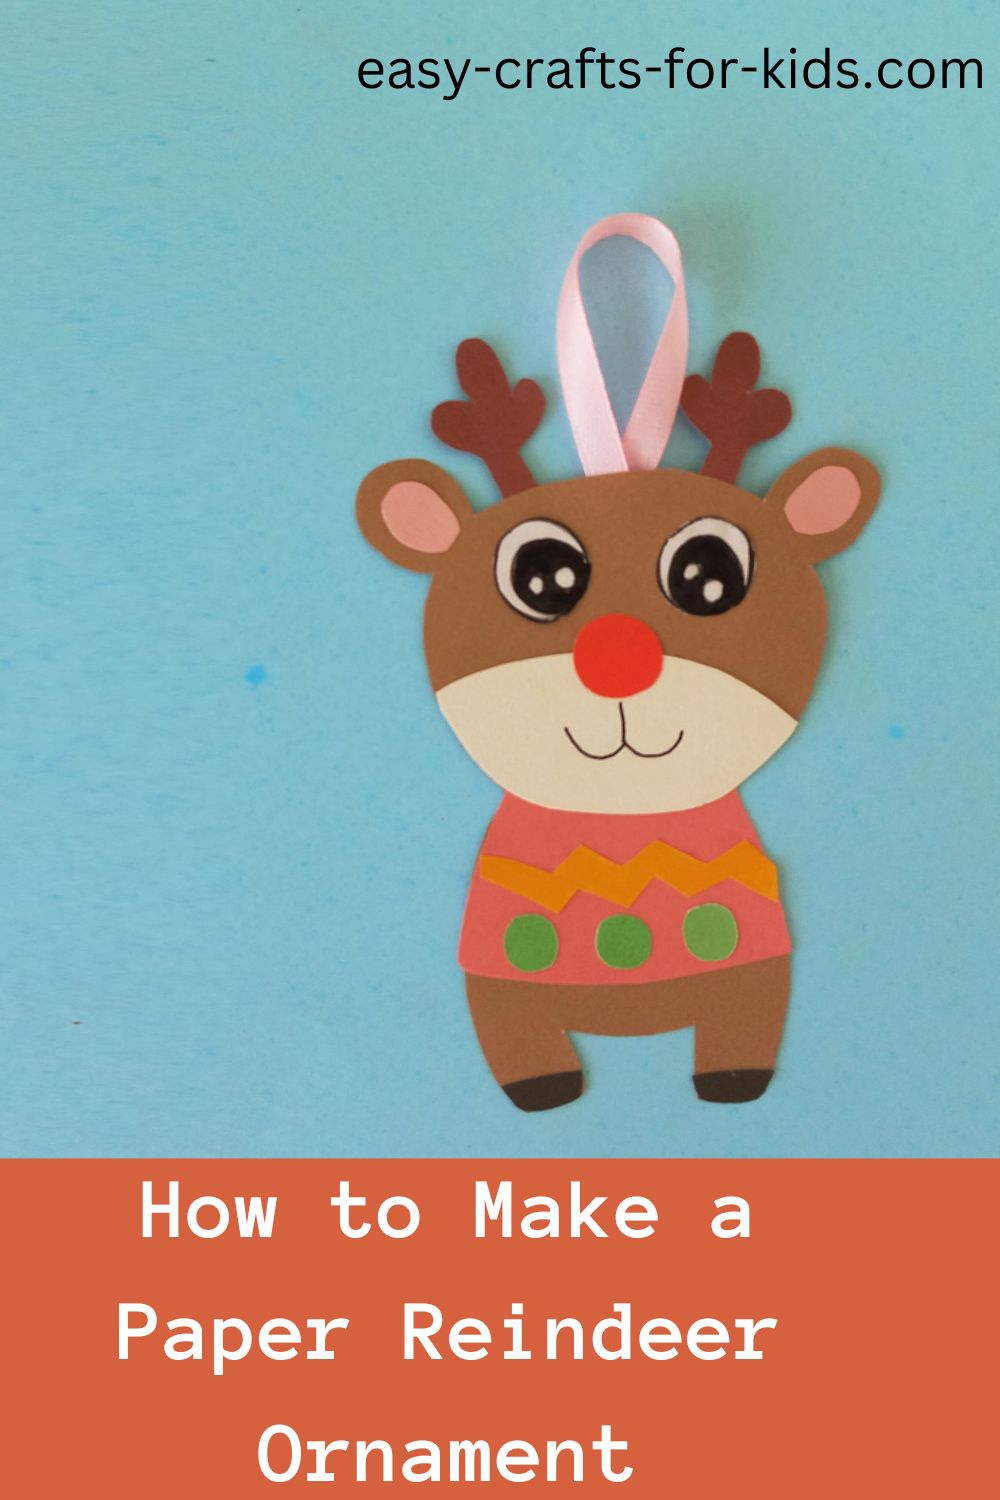 How to Make a Paper Reindeer Ornament